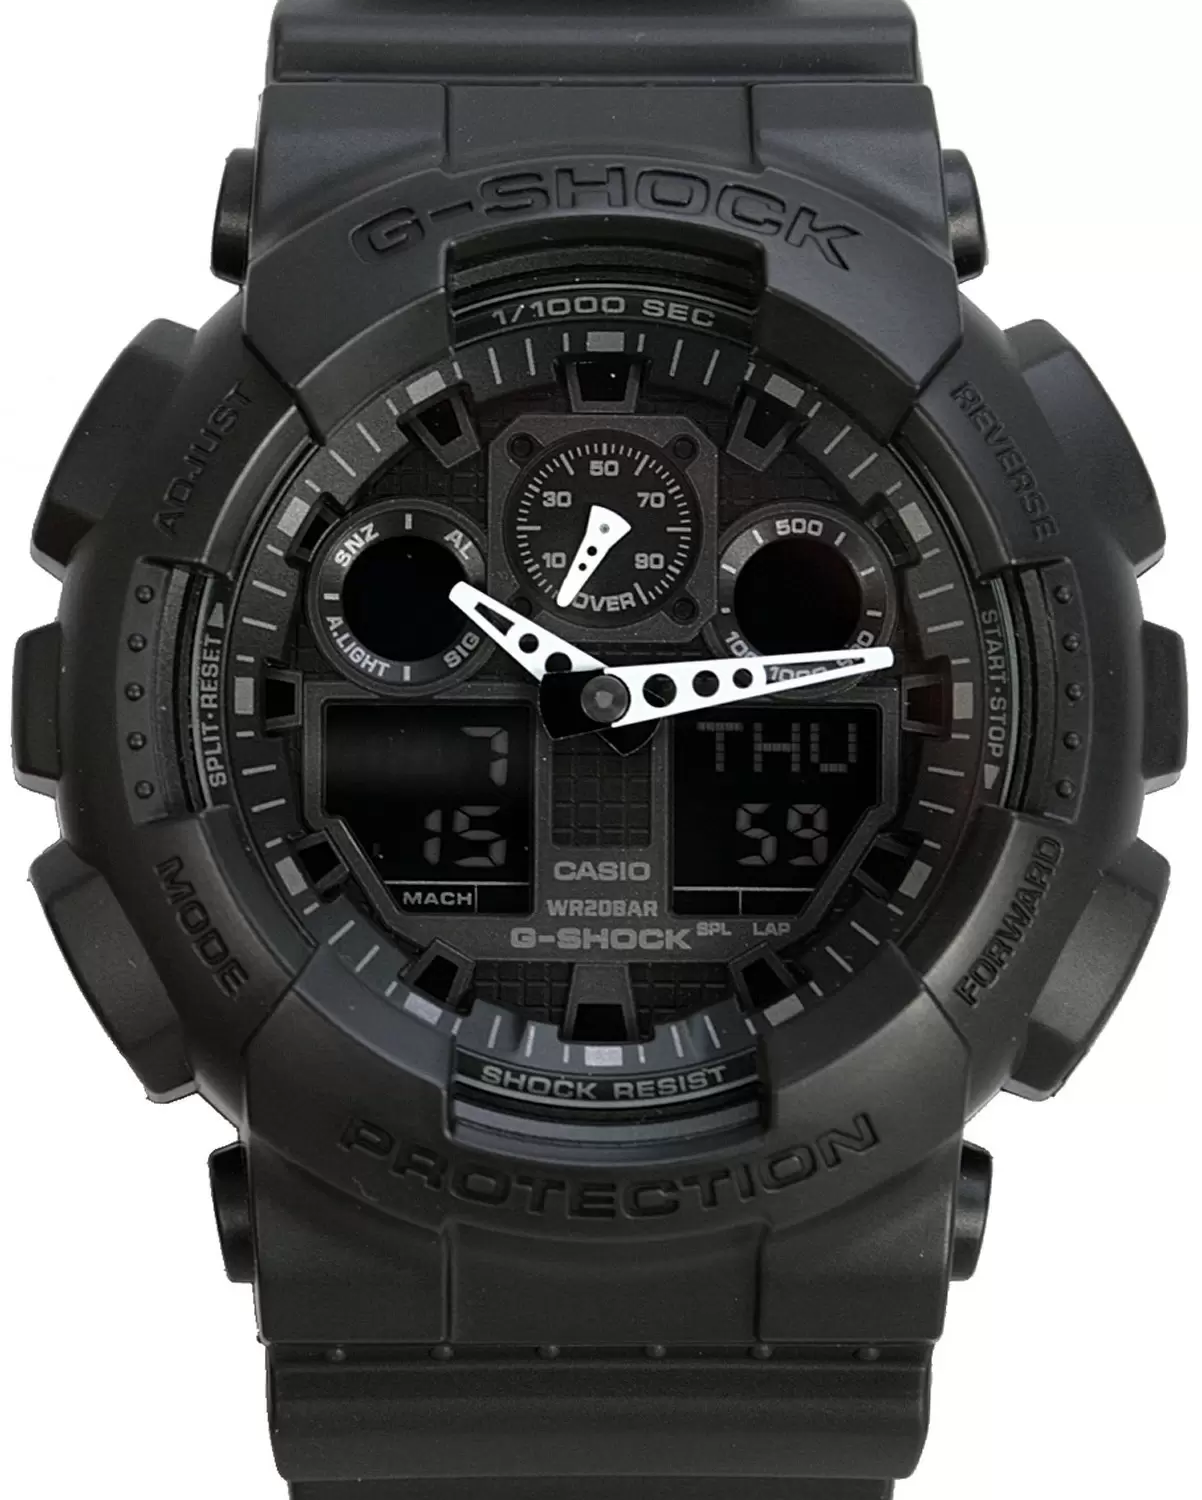 Casio G-Shock Ga-100-1A1DR Price in Pakistan, Specifications, Features